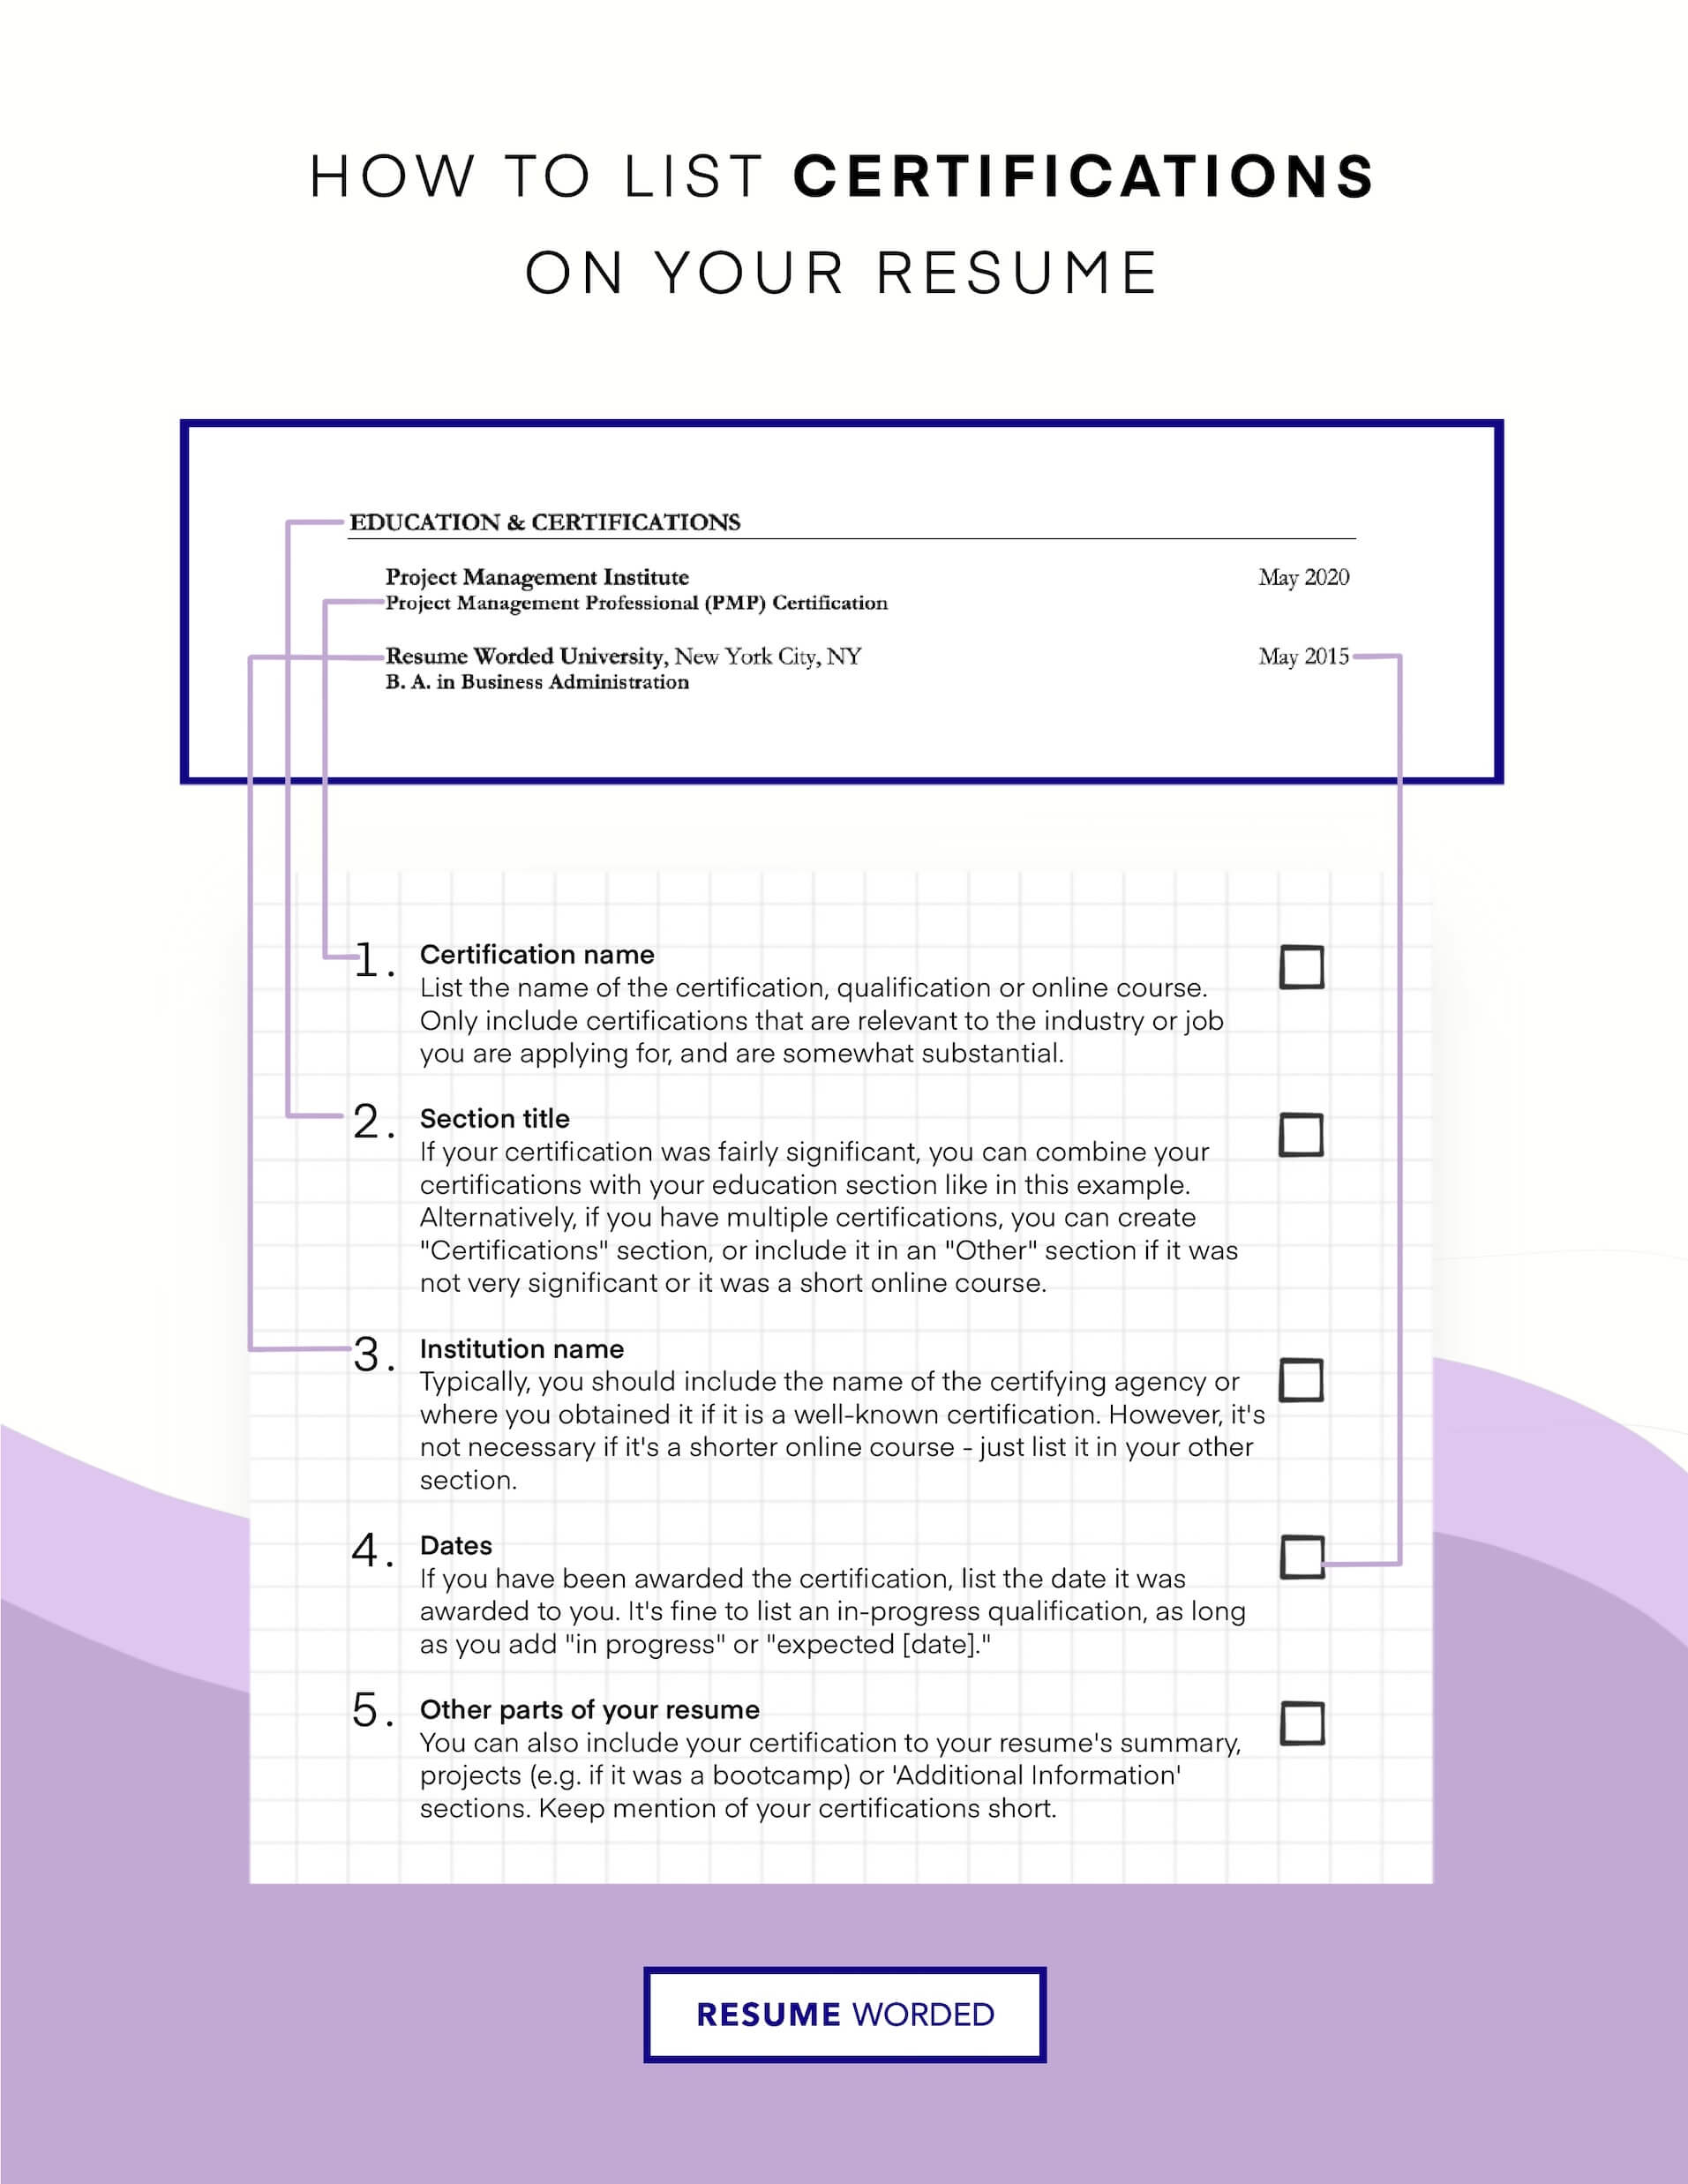 Make sure you have the right certification/license for your region. - Home Care Coordinator Resume